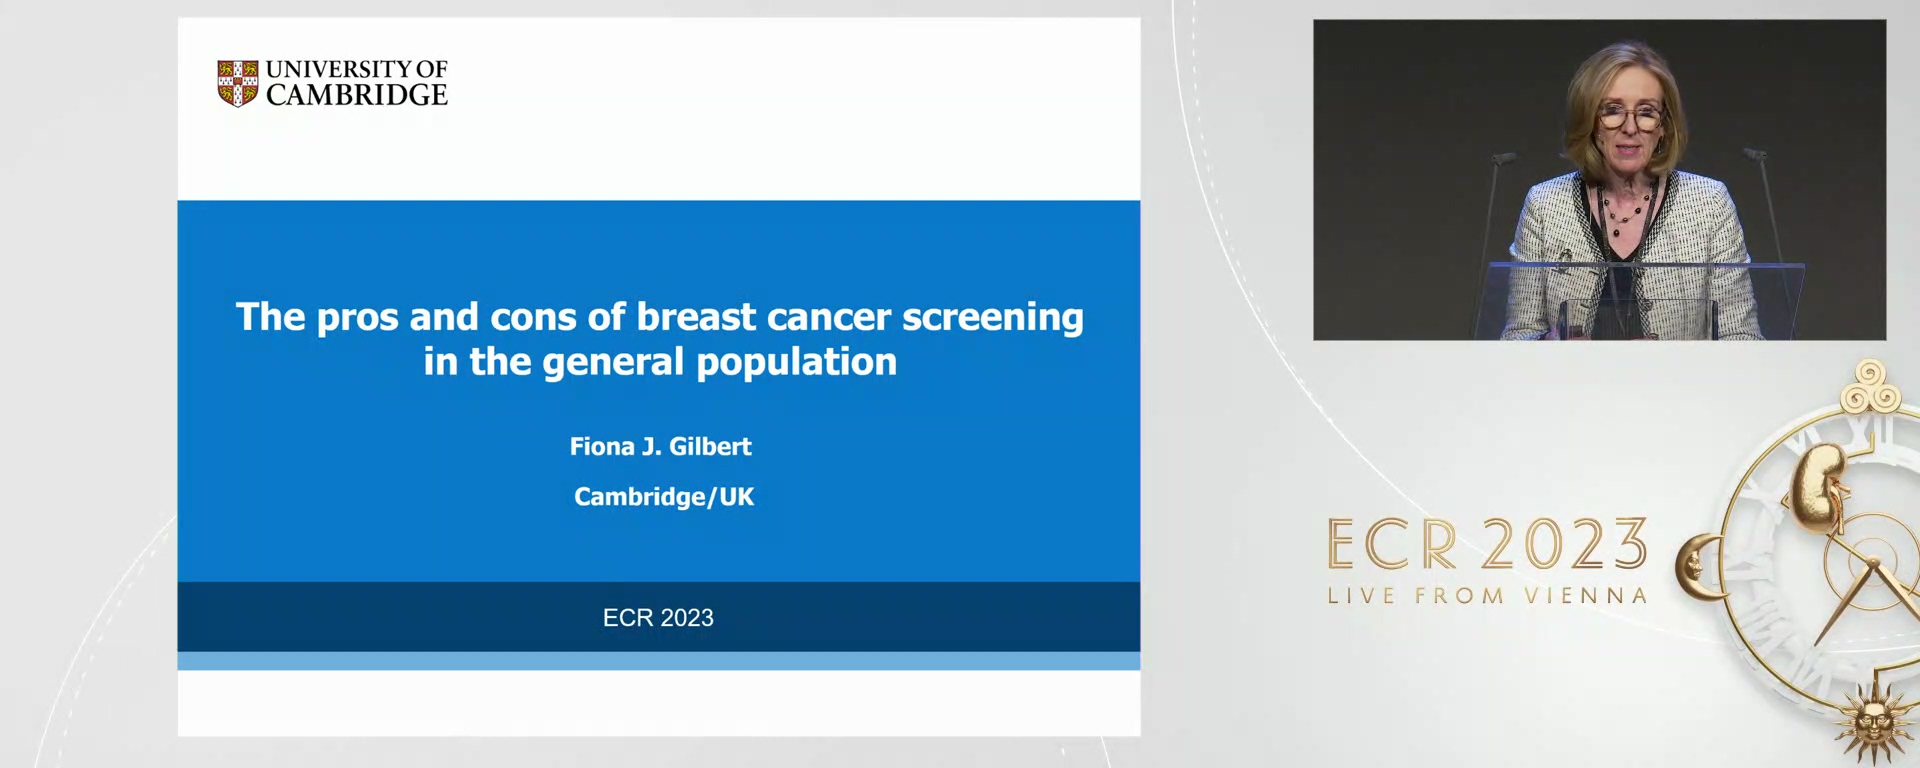 The pros and cons of breast cancer screening in the general population - Fiona J. Gilbert, Cambridge / UK